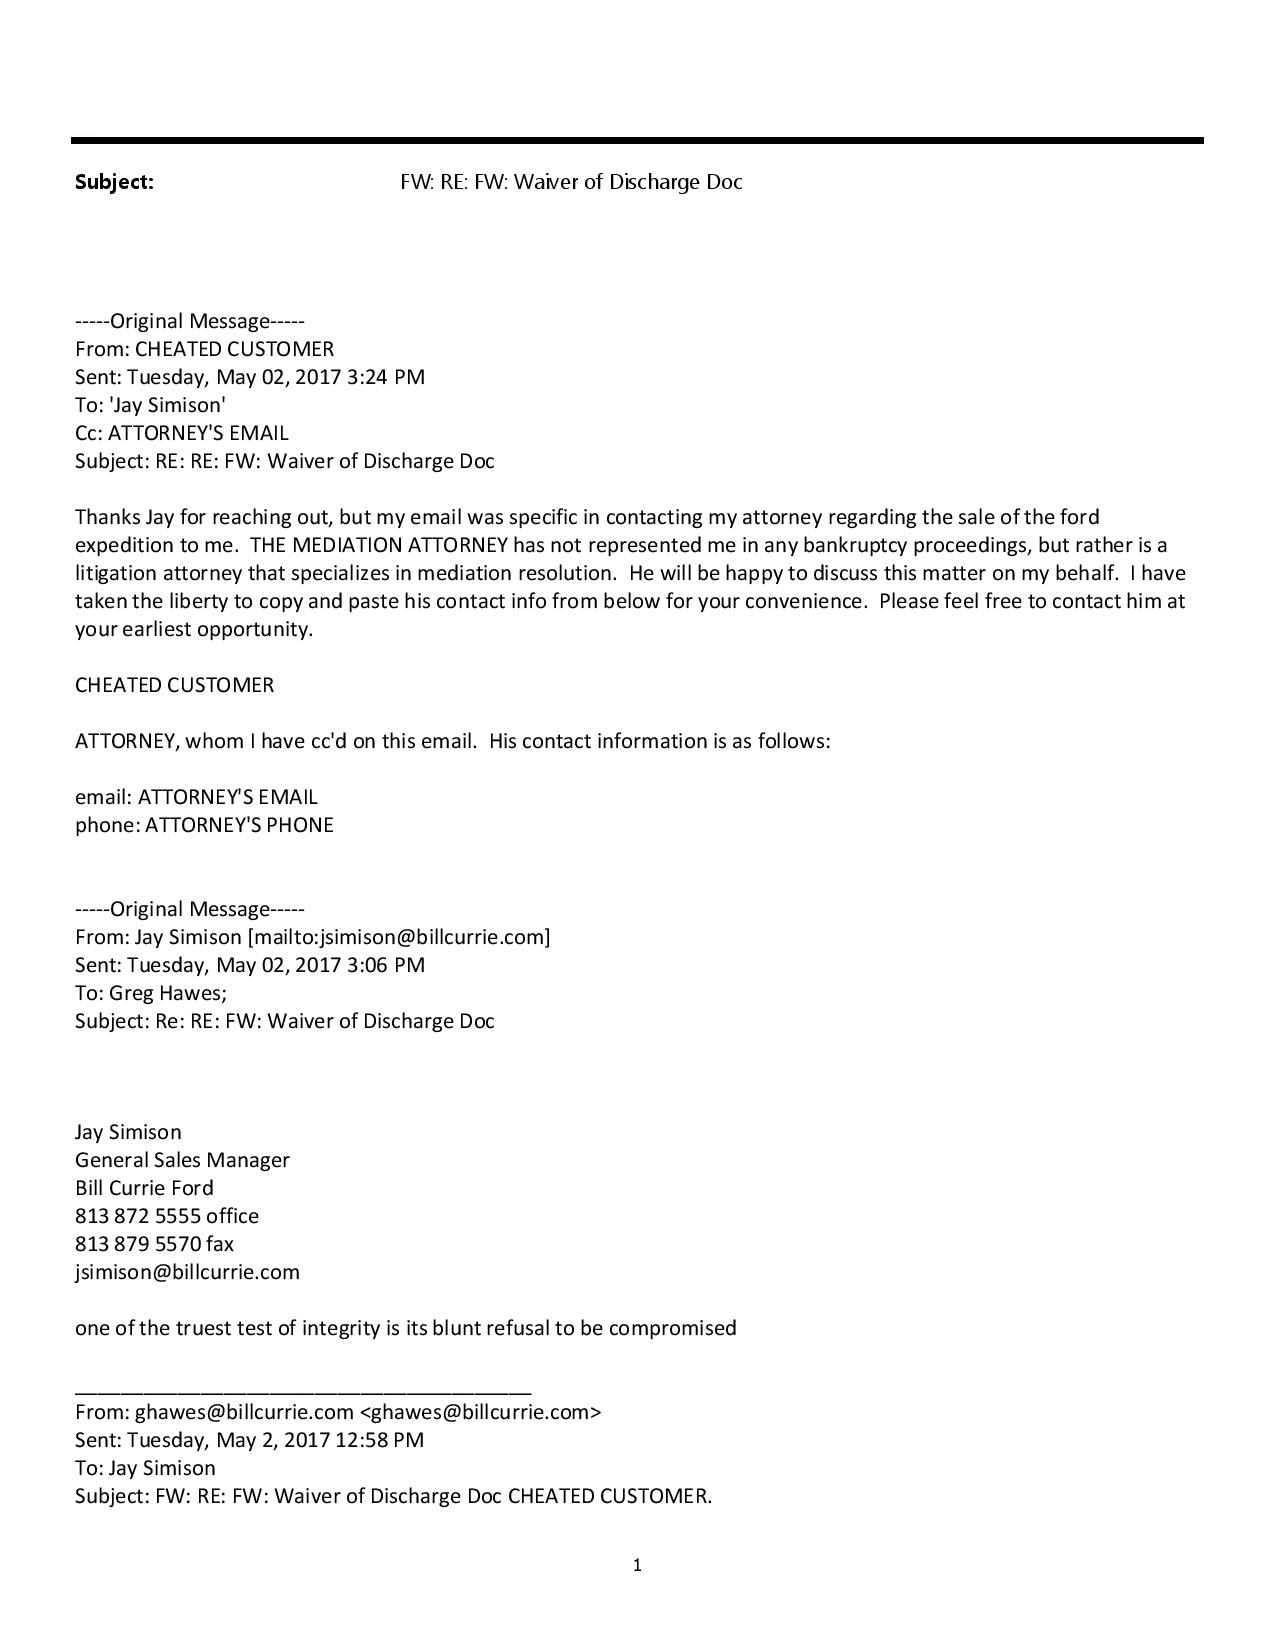 Bill Currie Ford sucks email